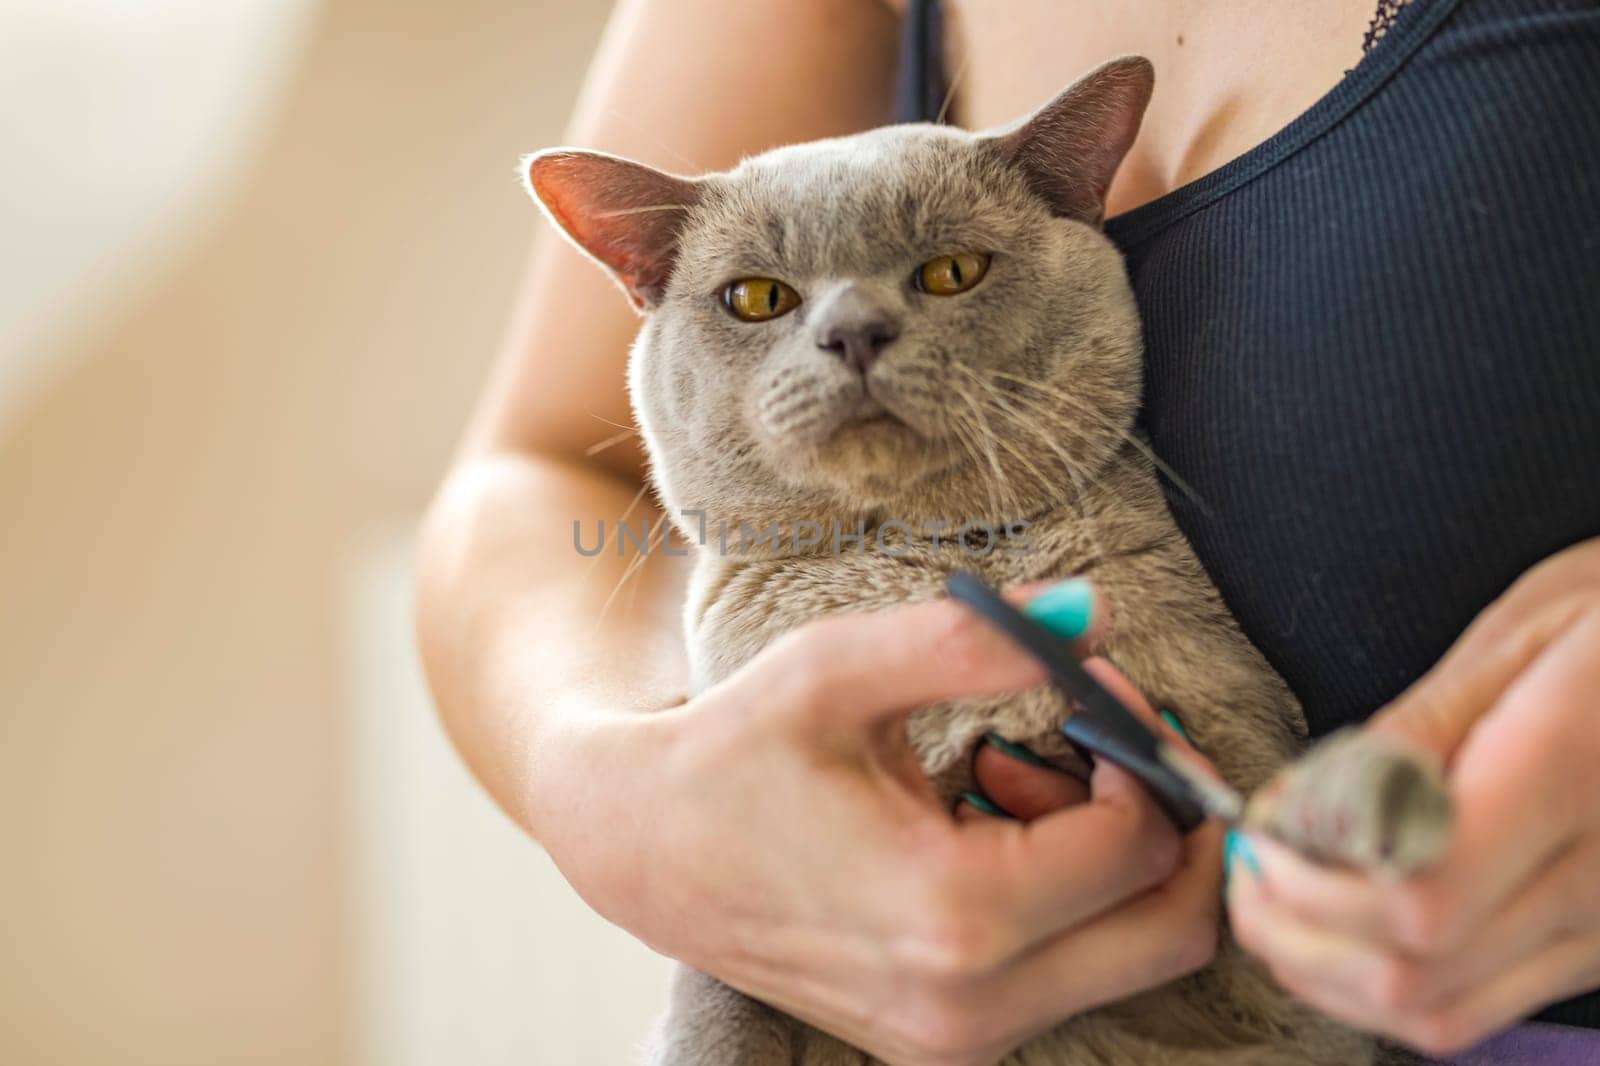 A domestic male Burmese cat, gray with yellow eyes, in the arms of the owner. He doesn't like having his claws trimmed. Cat care. Natural habitat. A happy pet.